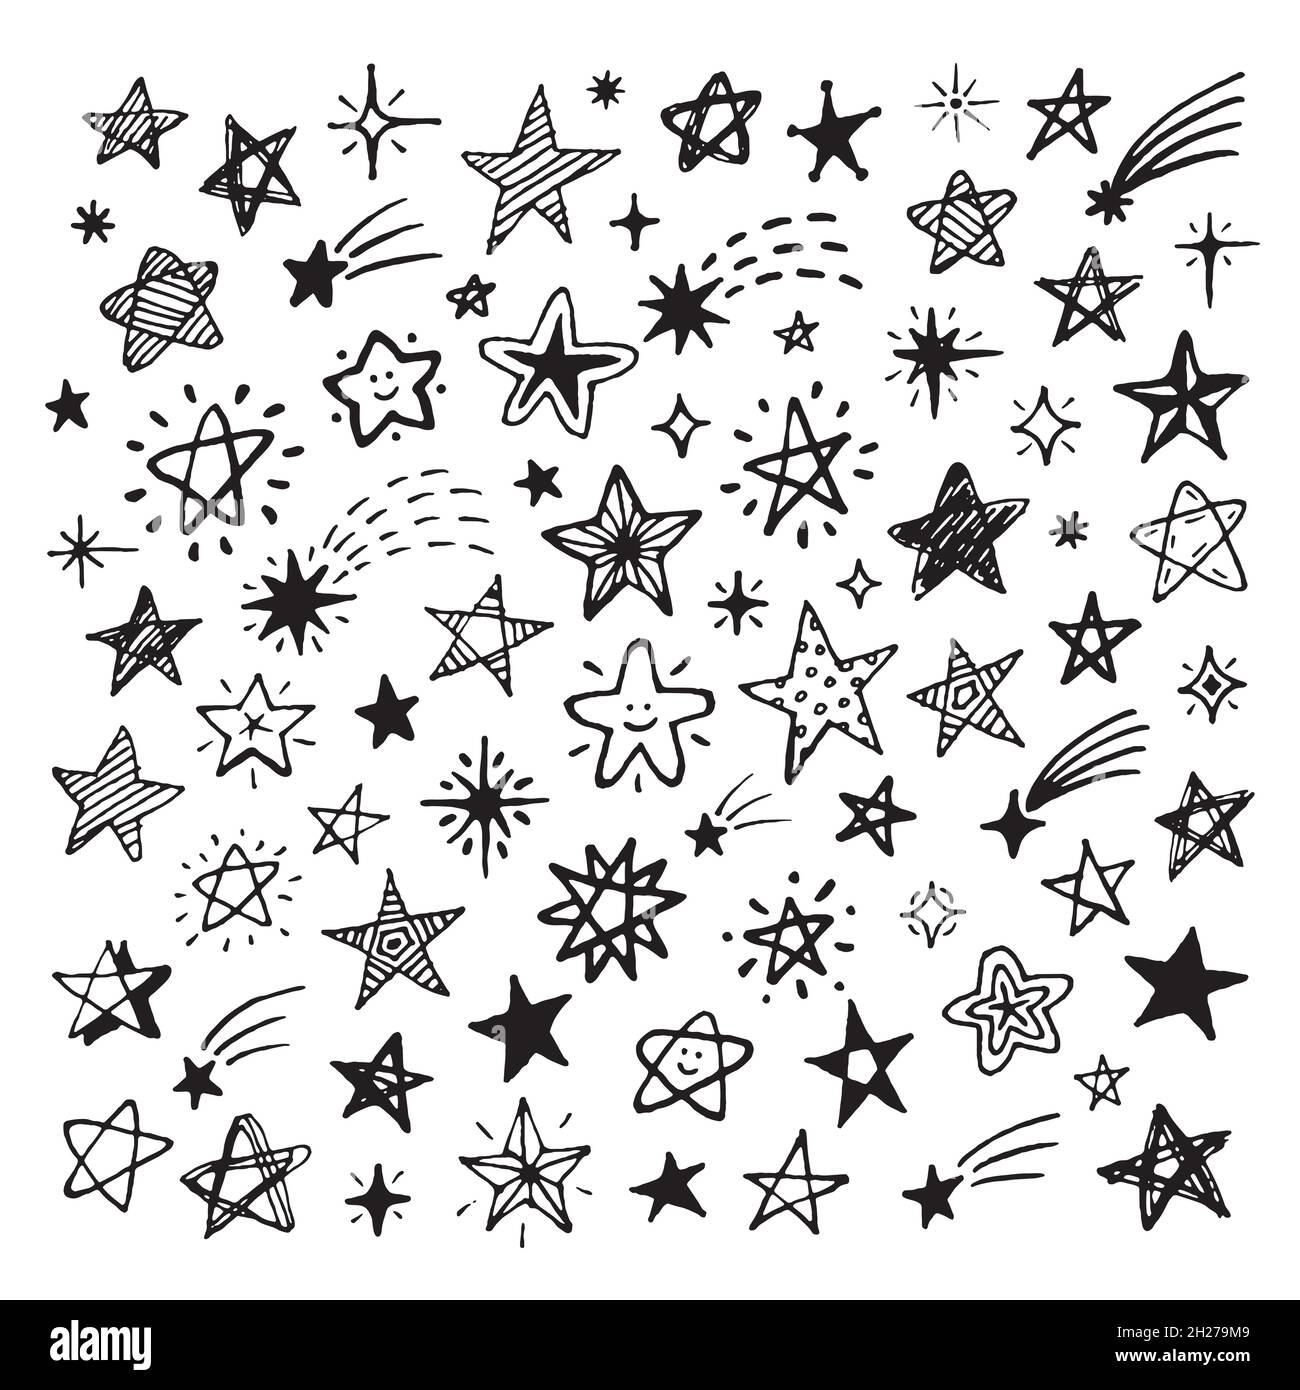 Sketch stars collection. Hand drawn star, sky drawing comet with ...